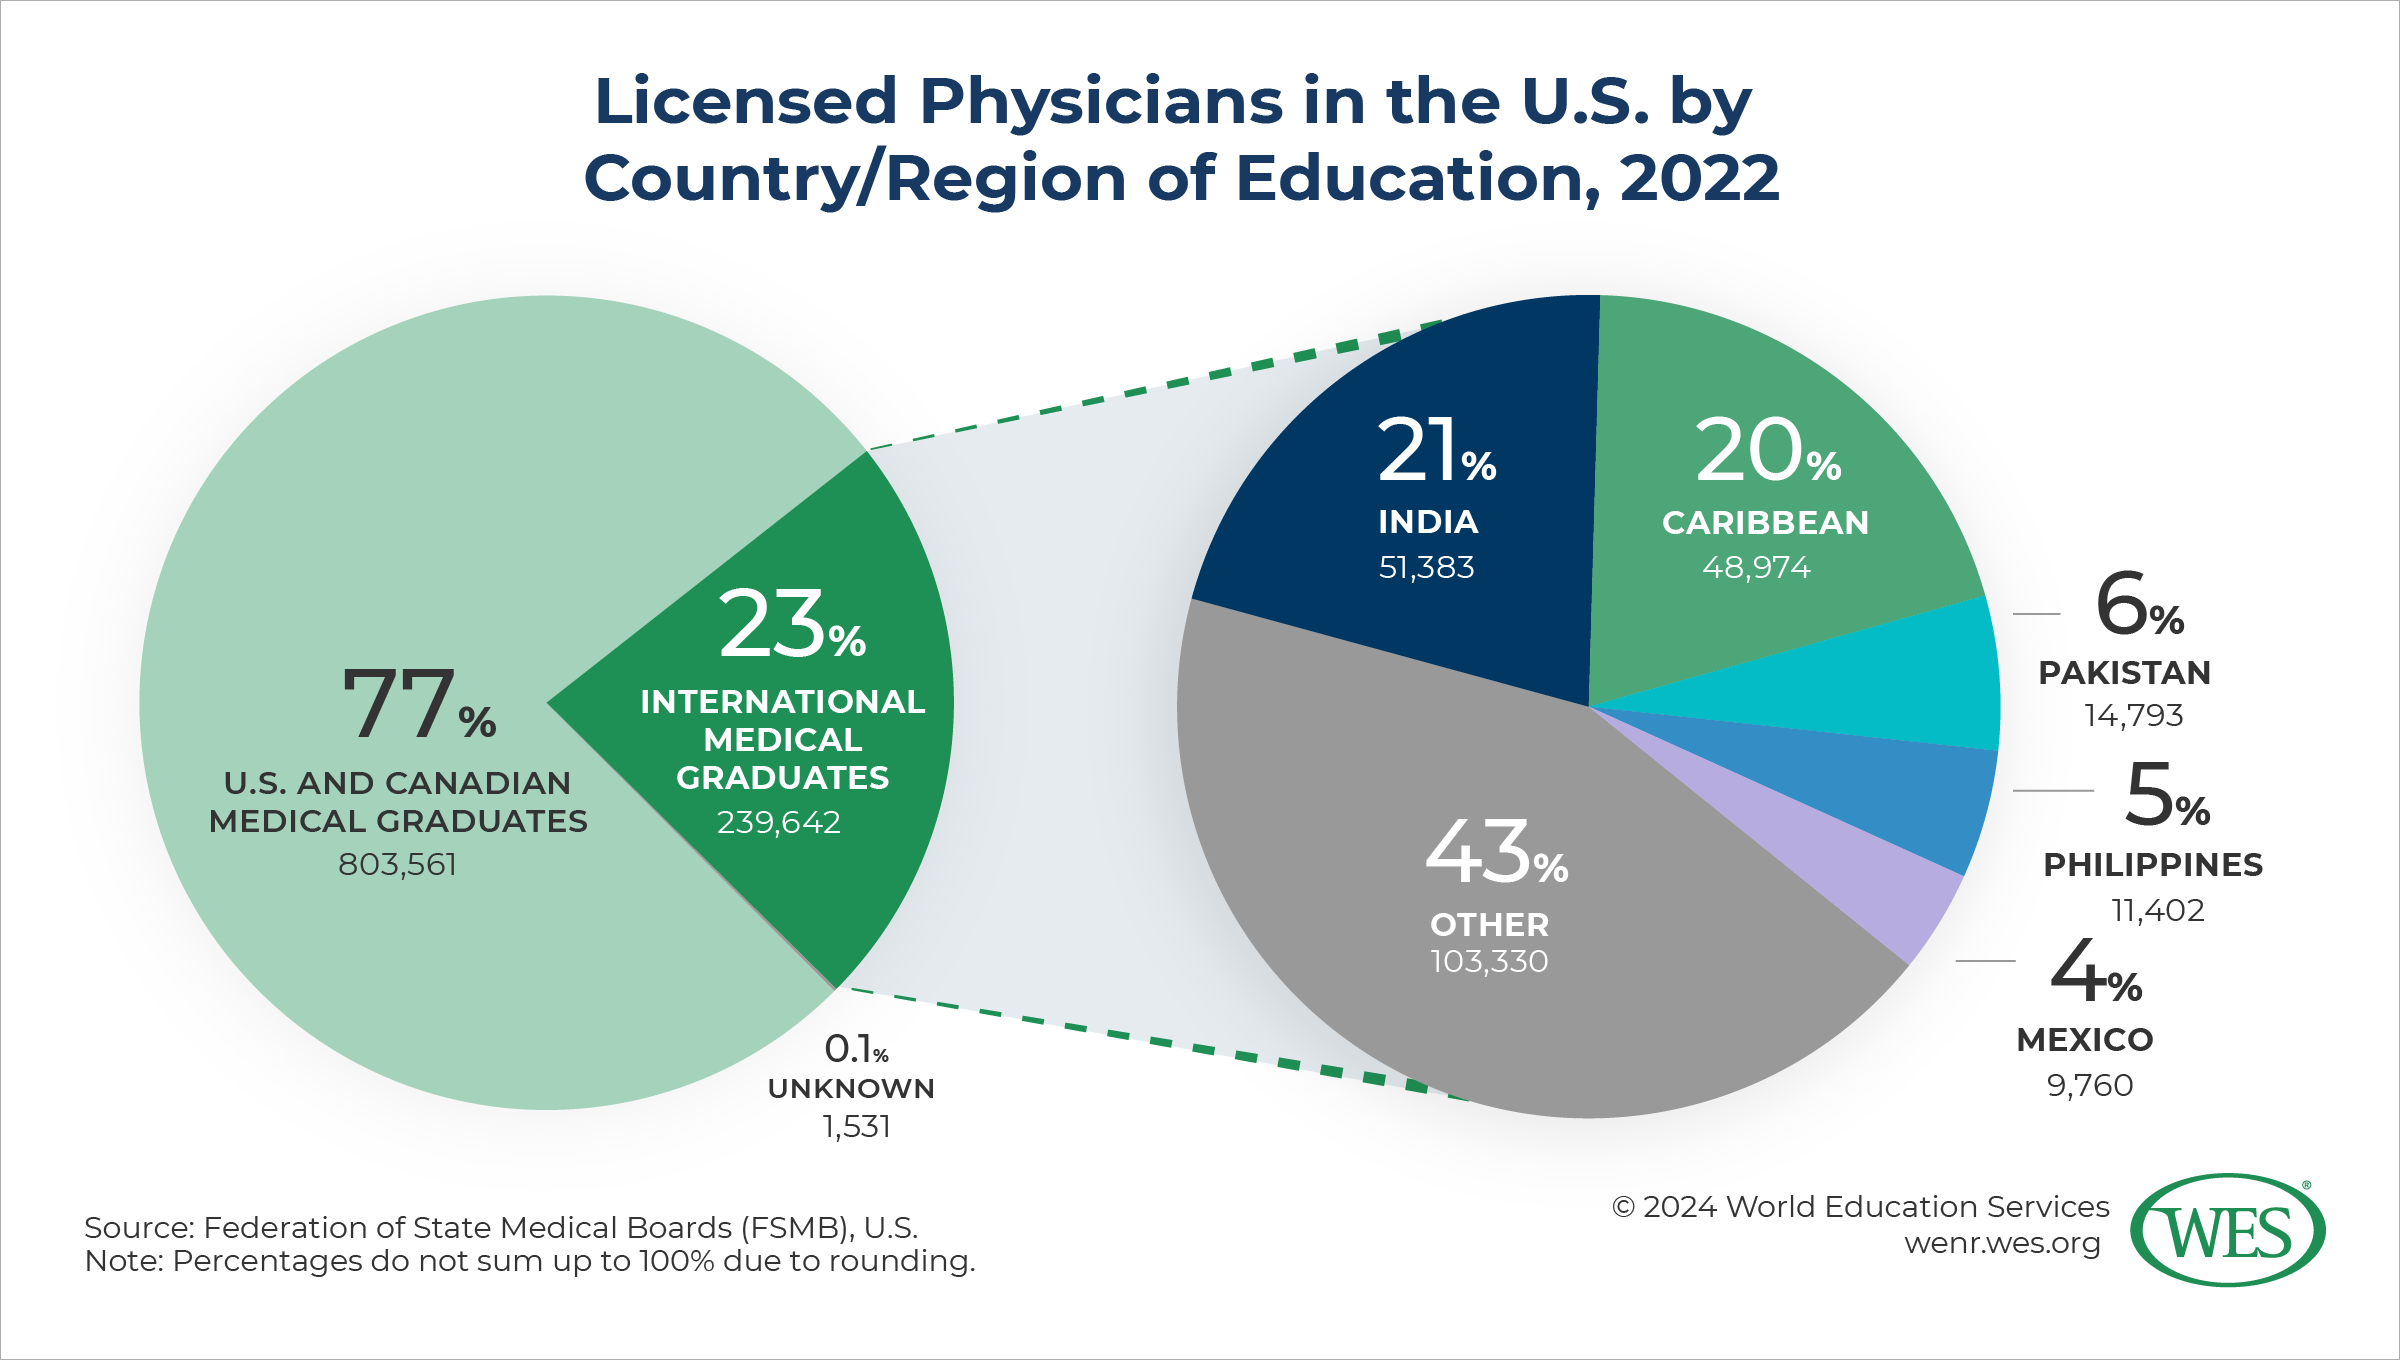 A graphic depicting the percentage of licensed physicians in the U.S. by country and region of education in 2022. 